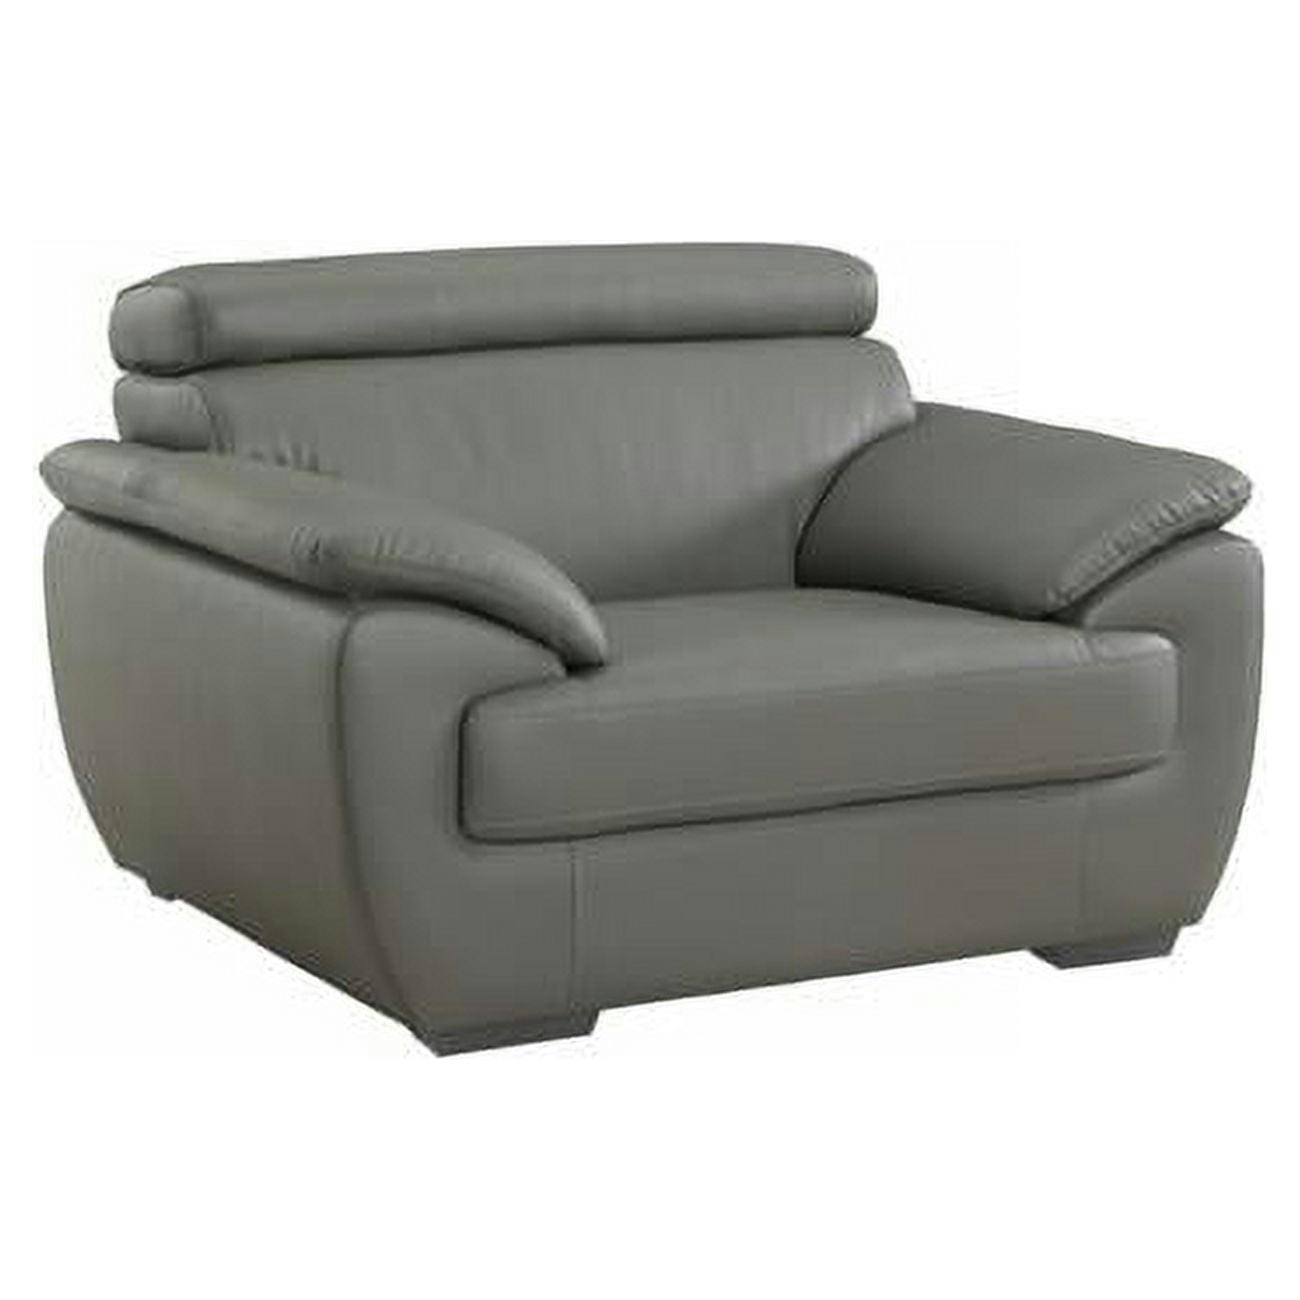 32-38" Modern Grey Leather Recliner Chair with Foam Comfort